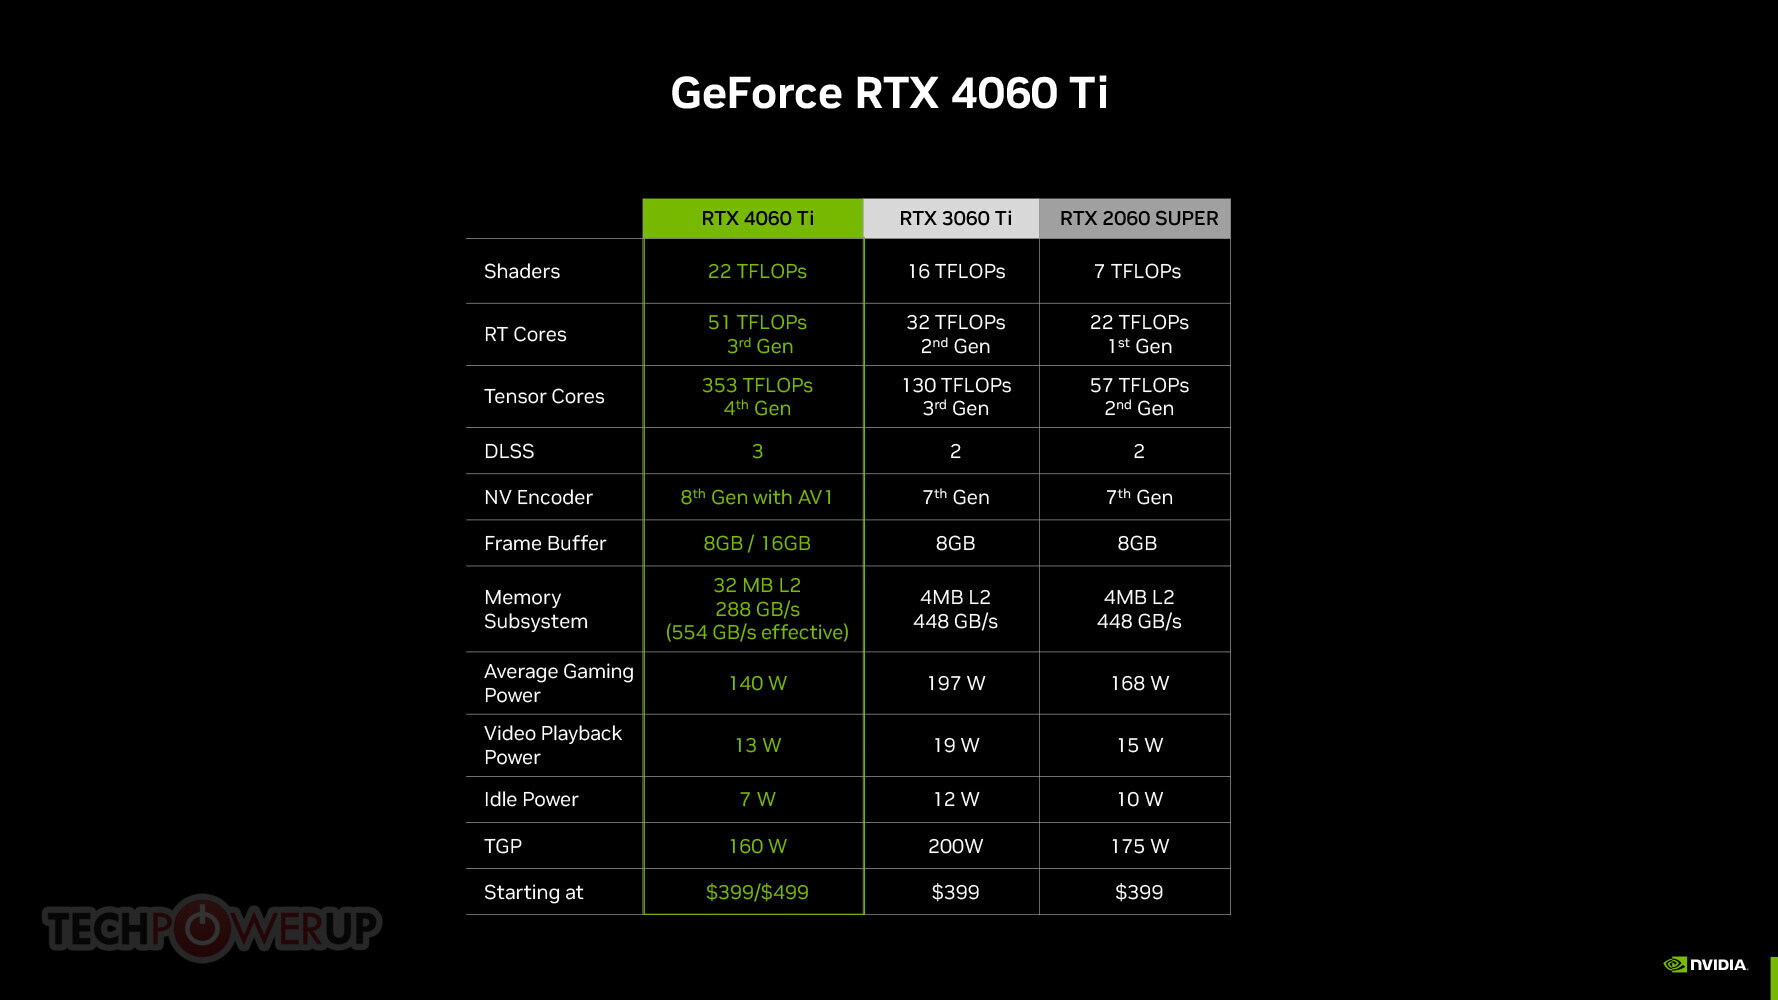 NVIDIA GeForce RTX 3060 Ti GDDR6X Speeds Past Overclocked GDDR6 Variant In  Tests